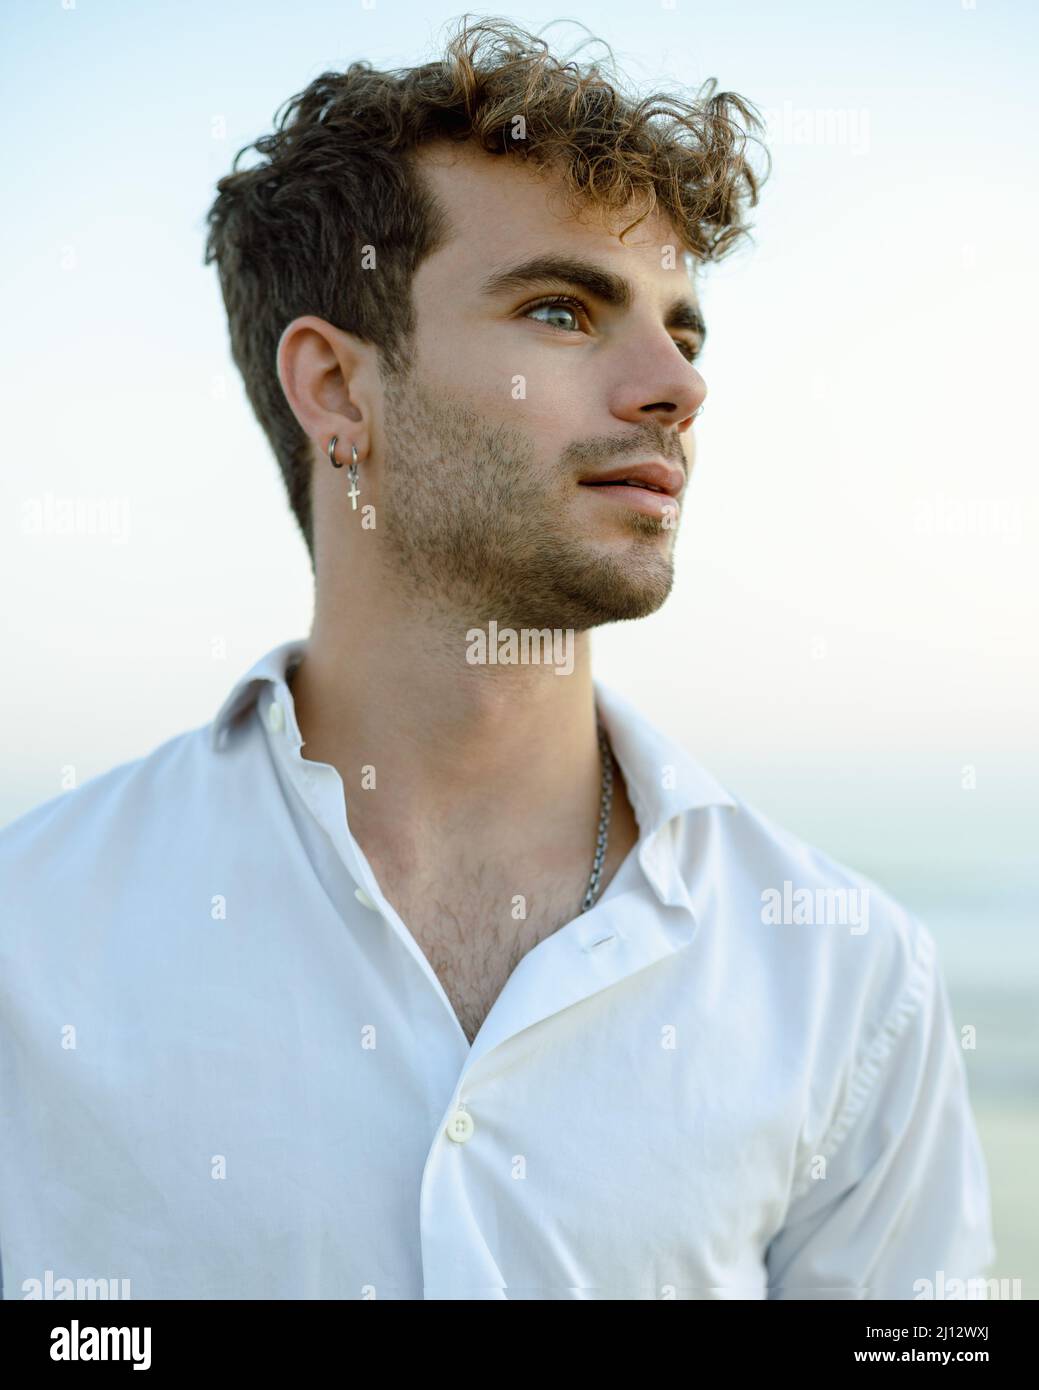 Portrait of a Caucasian (White) Spanish male with an earring Stock Photo